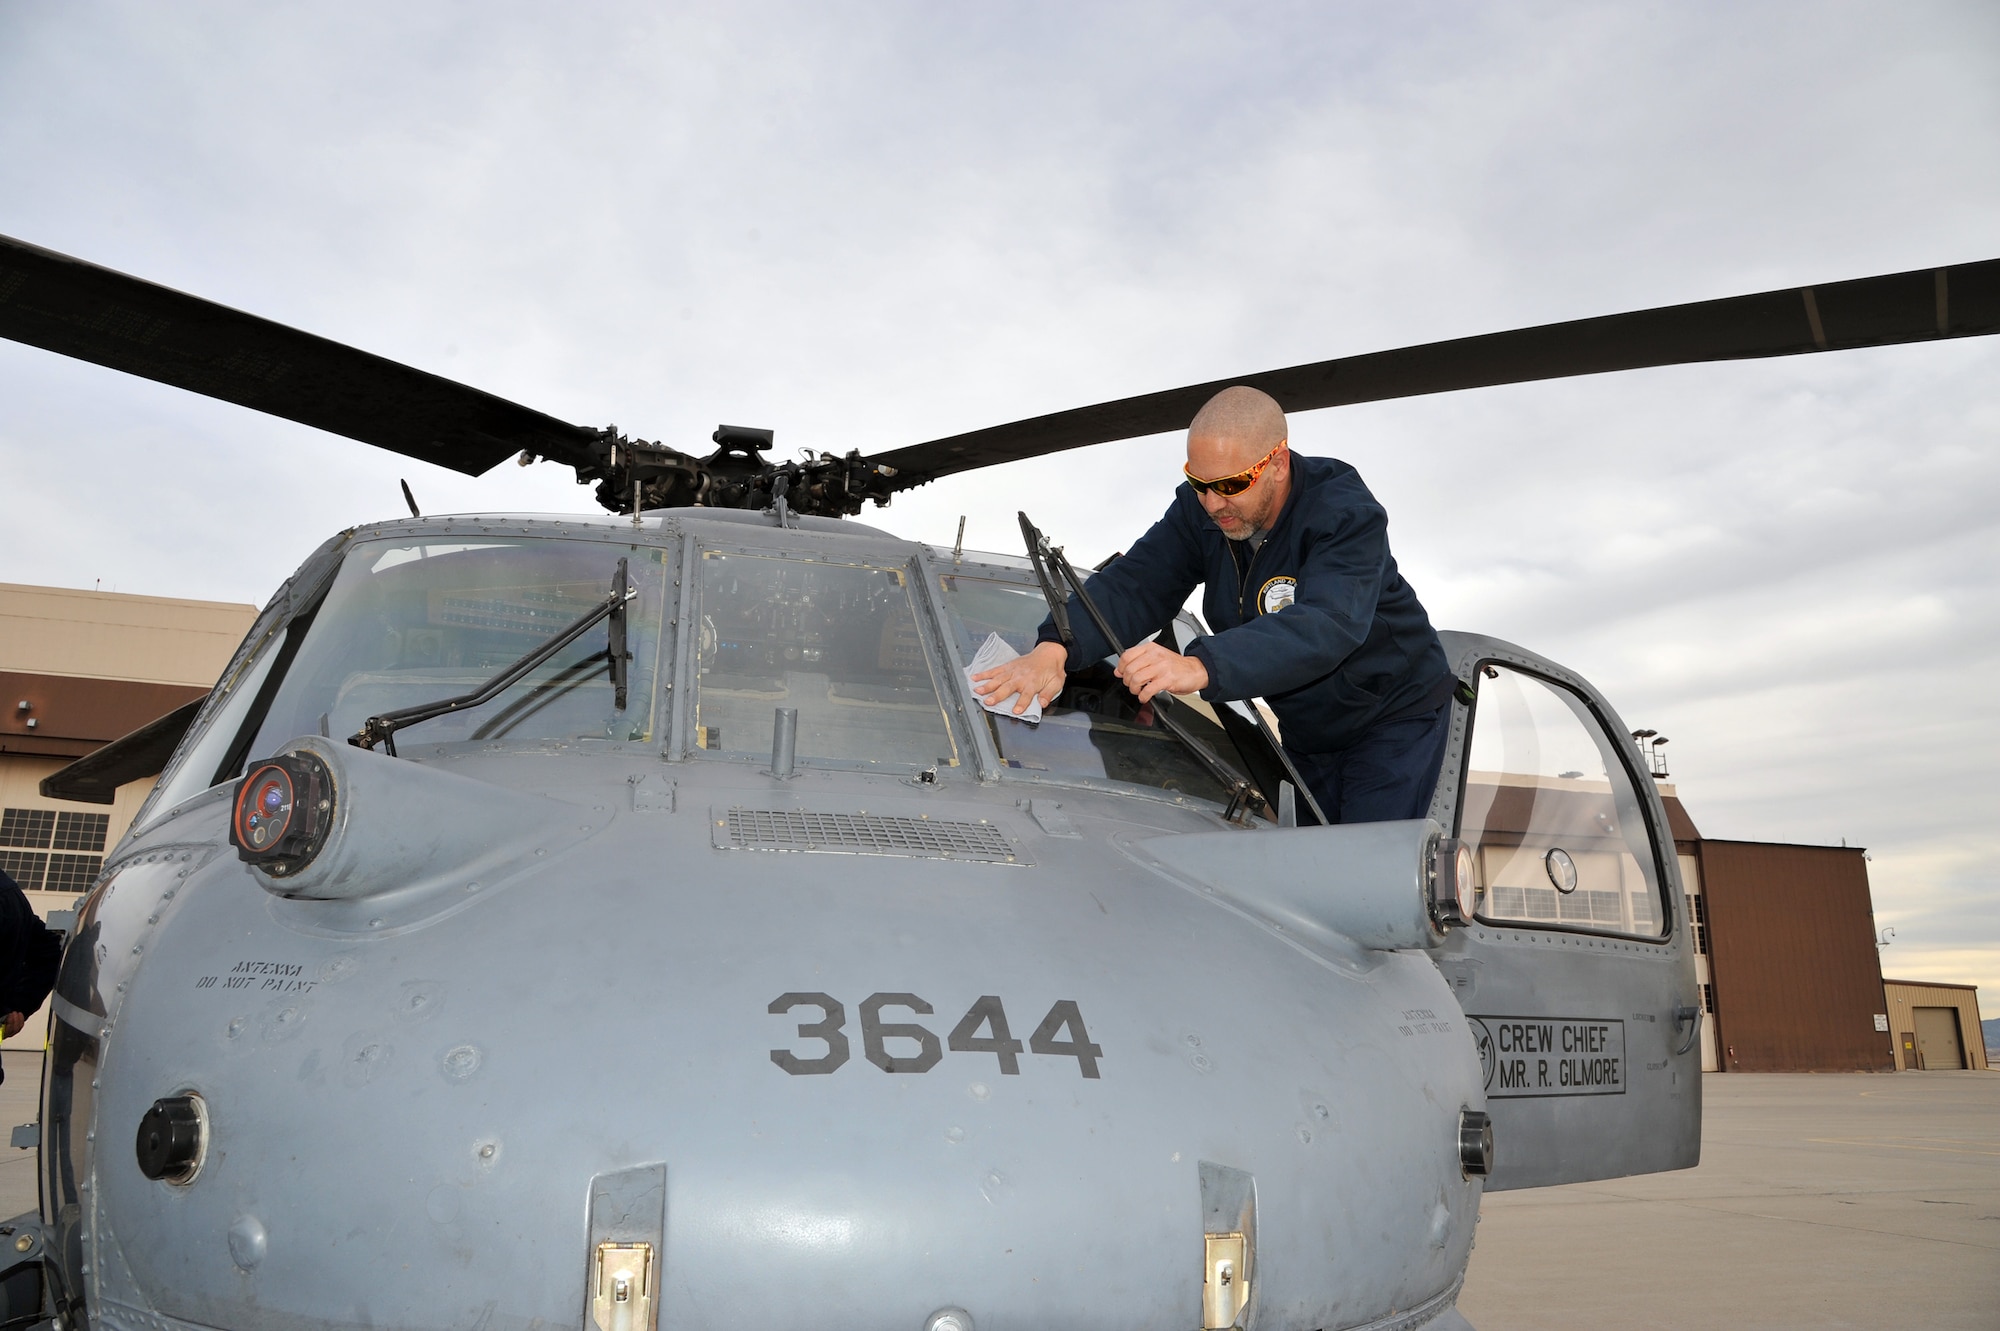 Bob Gilmore, M1 Support Services crew chief, prepares his aircraft for a training mission, where it will surpass 12,000 flying hours.